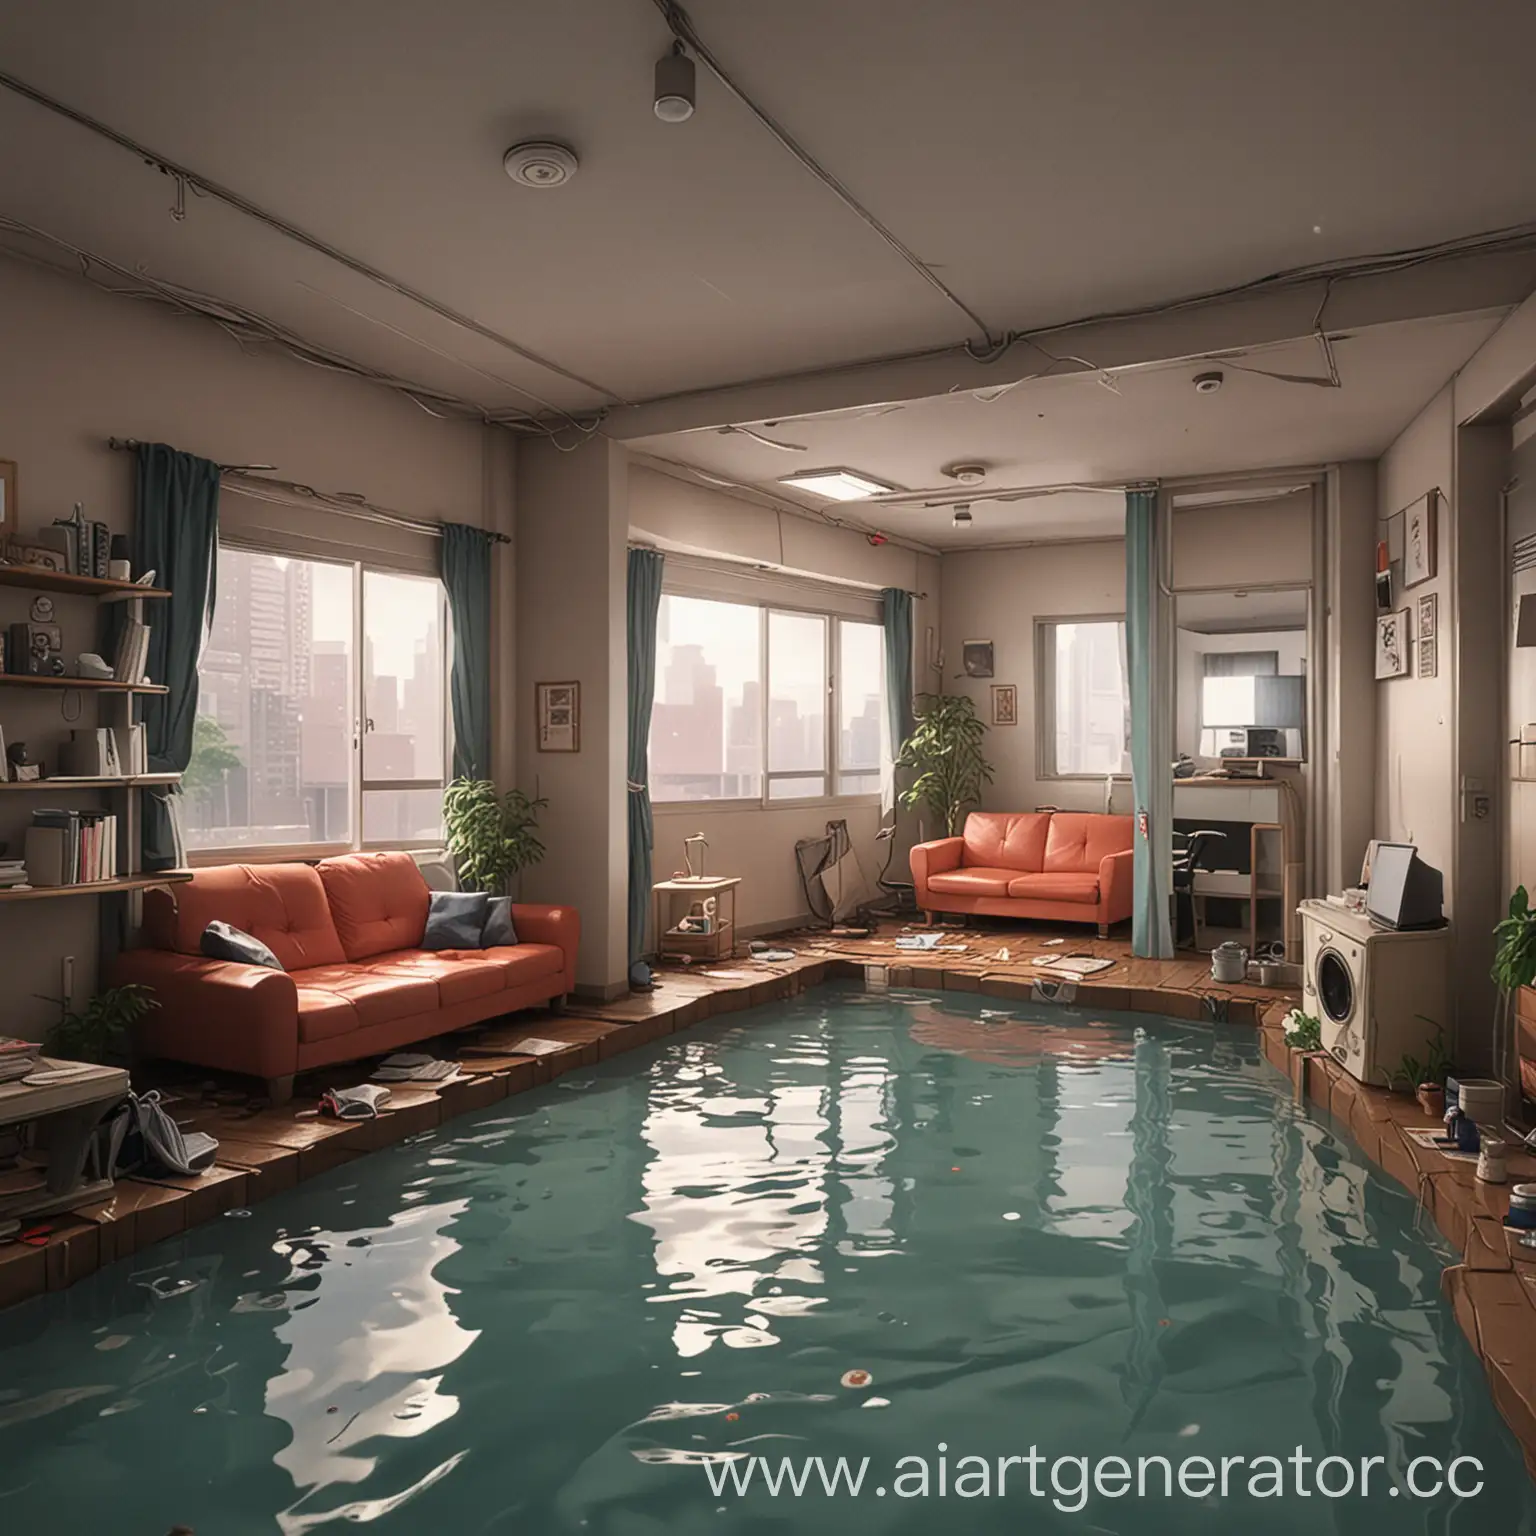 AnimeStyle-Flooded-Apartment-Surreal-Scene-of-Deluge-Amidst-Urban-Living